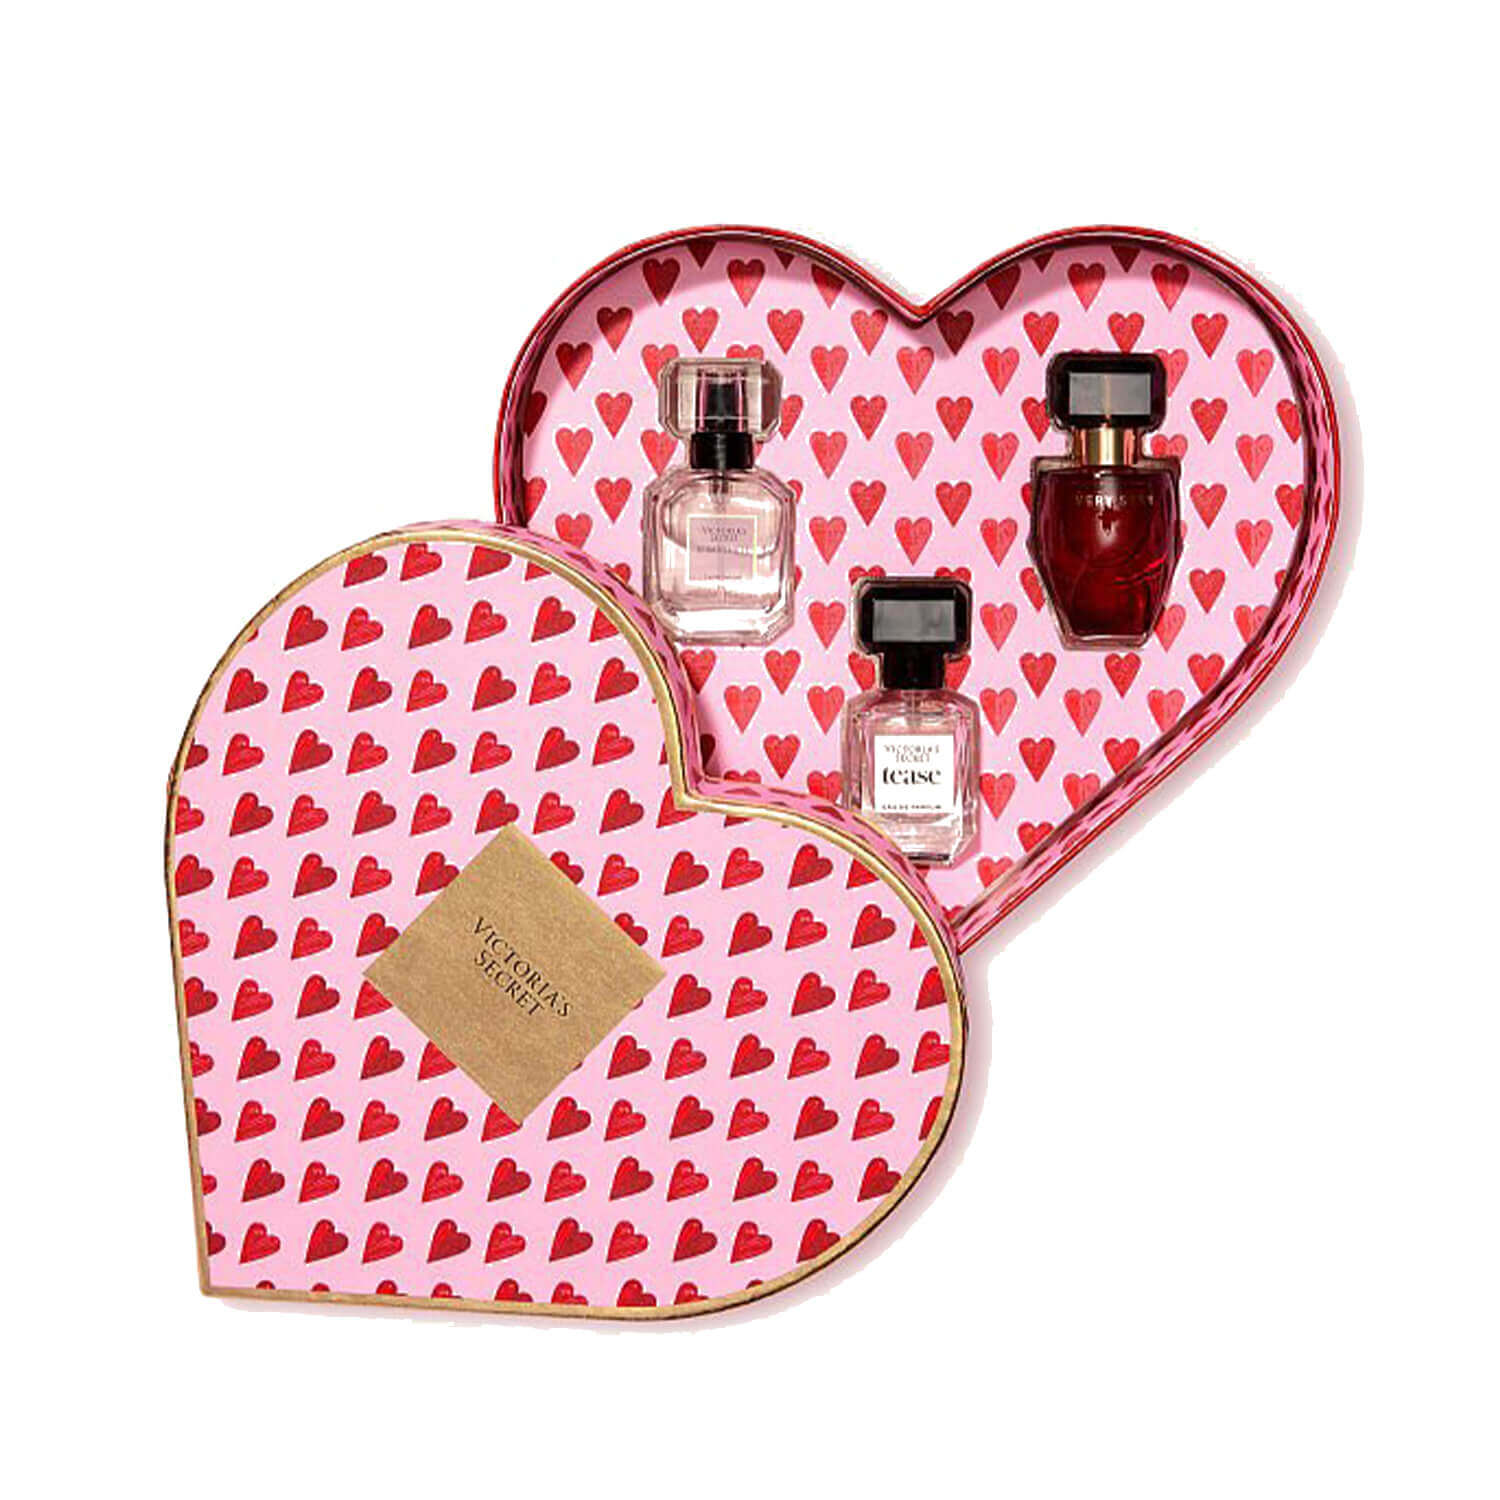 Shop Victoria's Secret bombshell tease perfume gift set available at Heygirl.pk for delivery in Pakistan